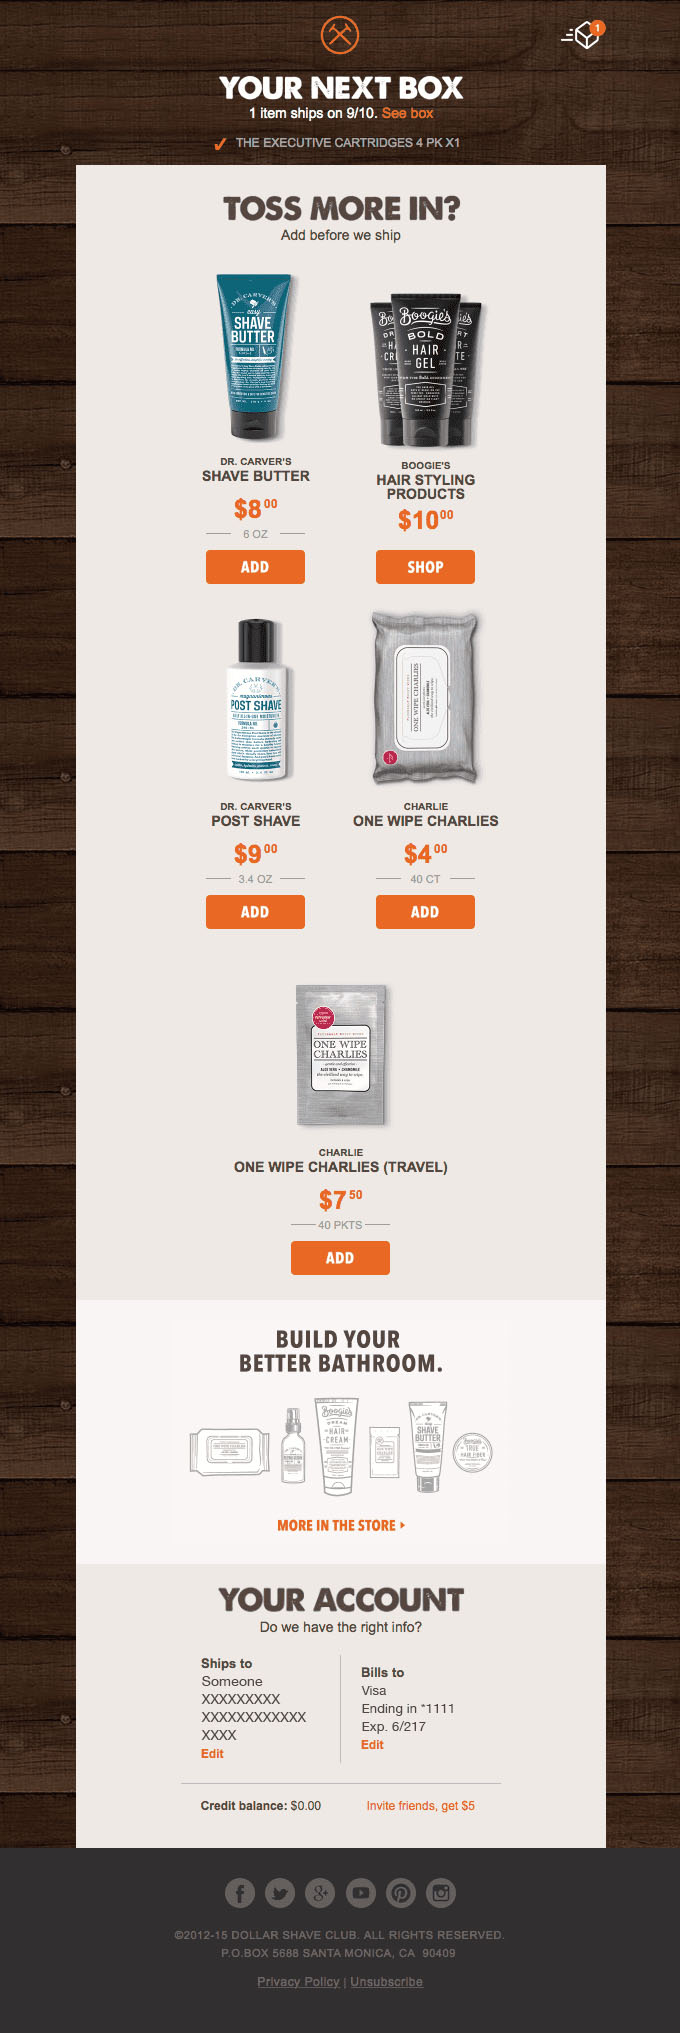 Onboarding Emails - Upsell Email - Dollar Shave Club